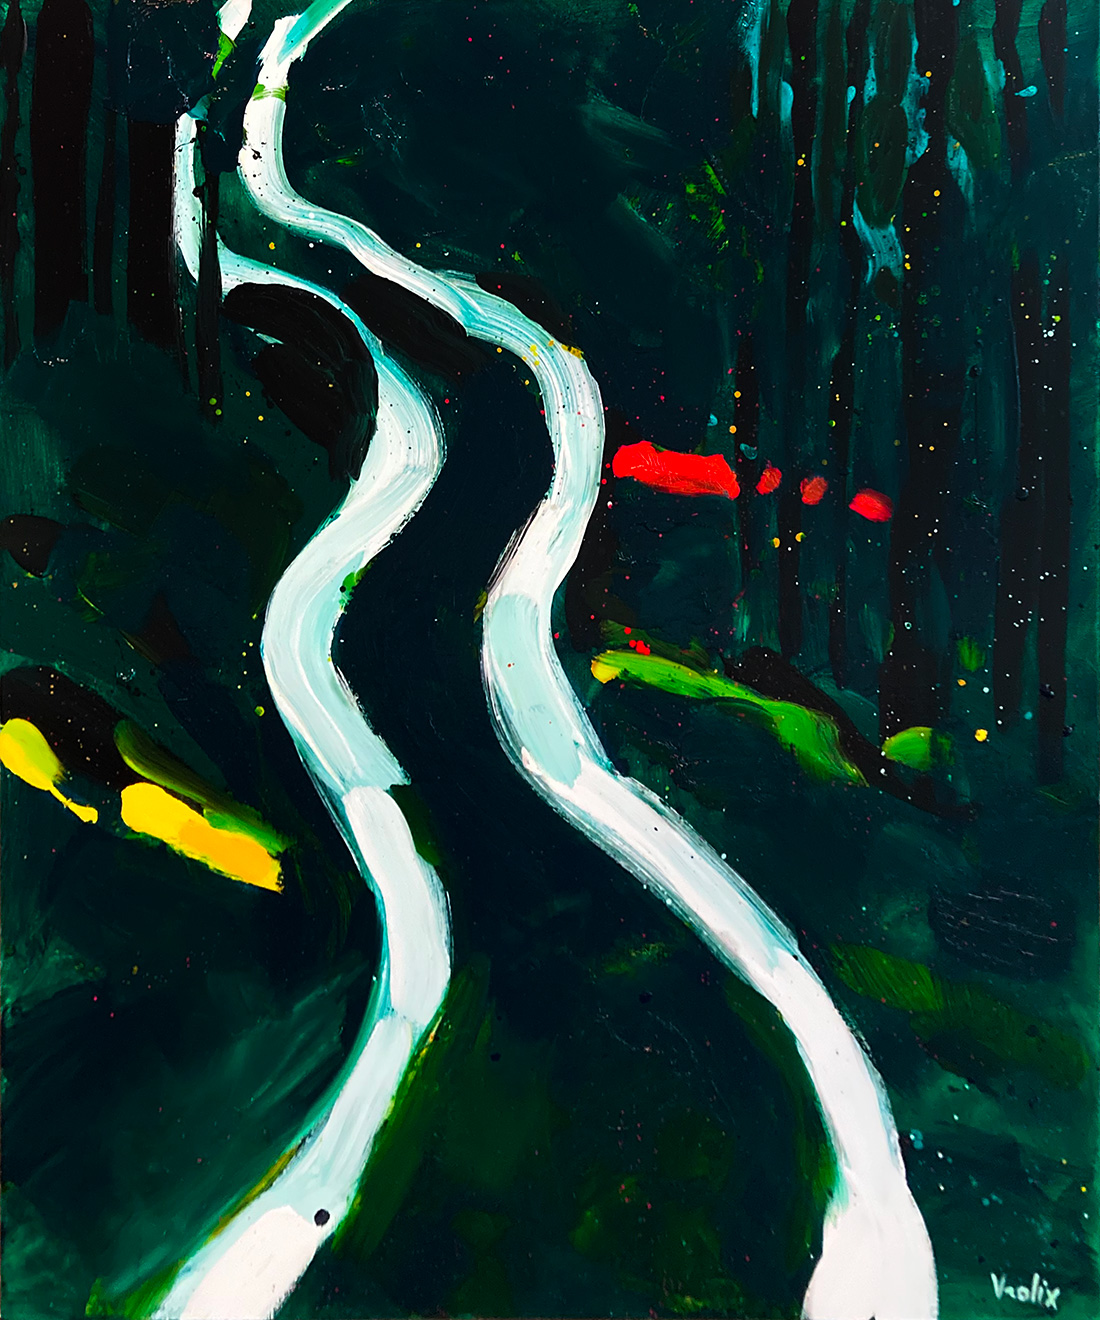 The Road Ahead, a painting by Guido Vrolix